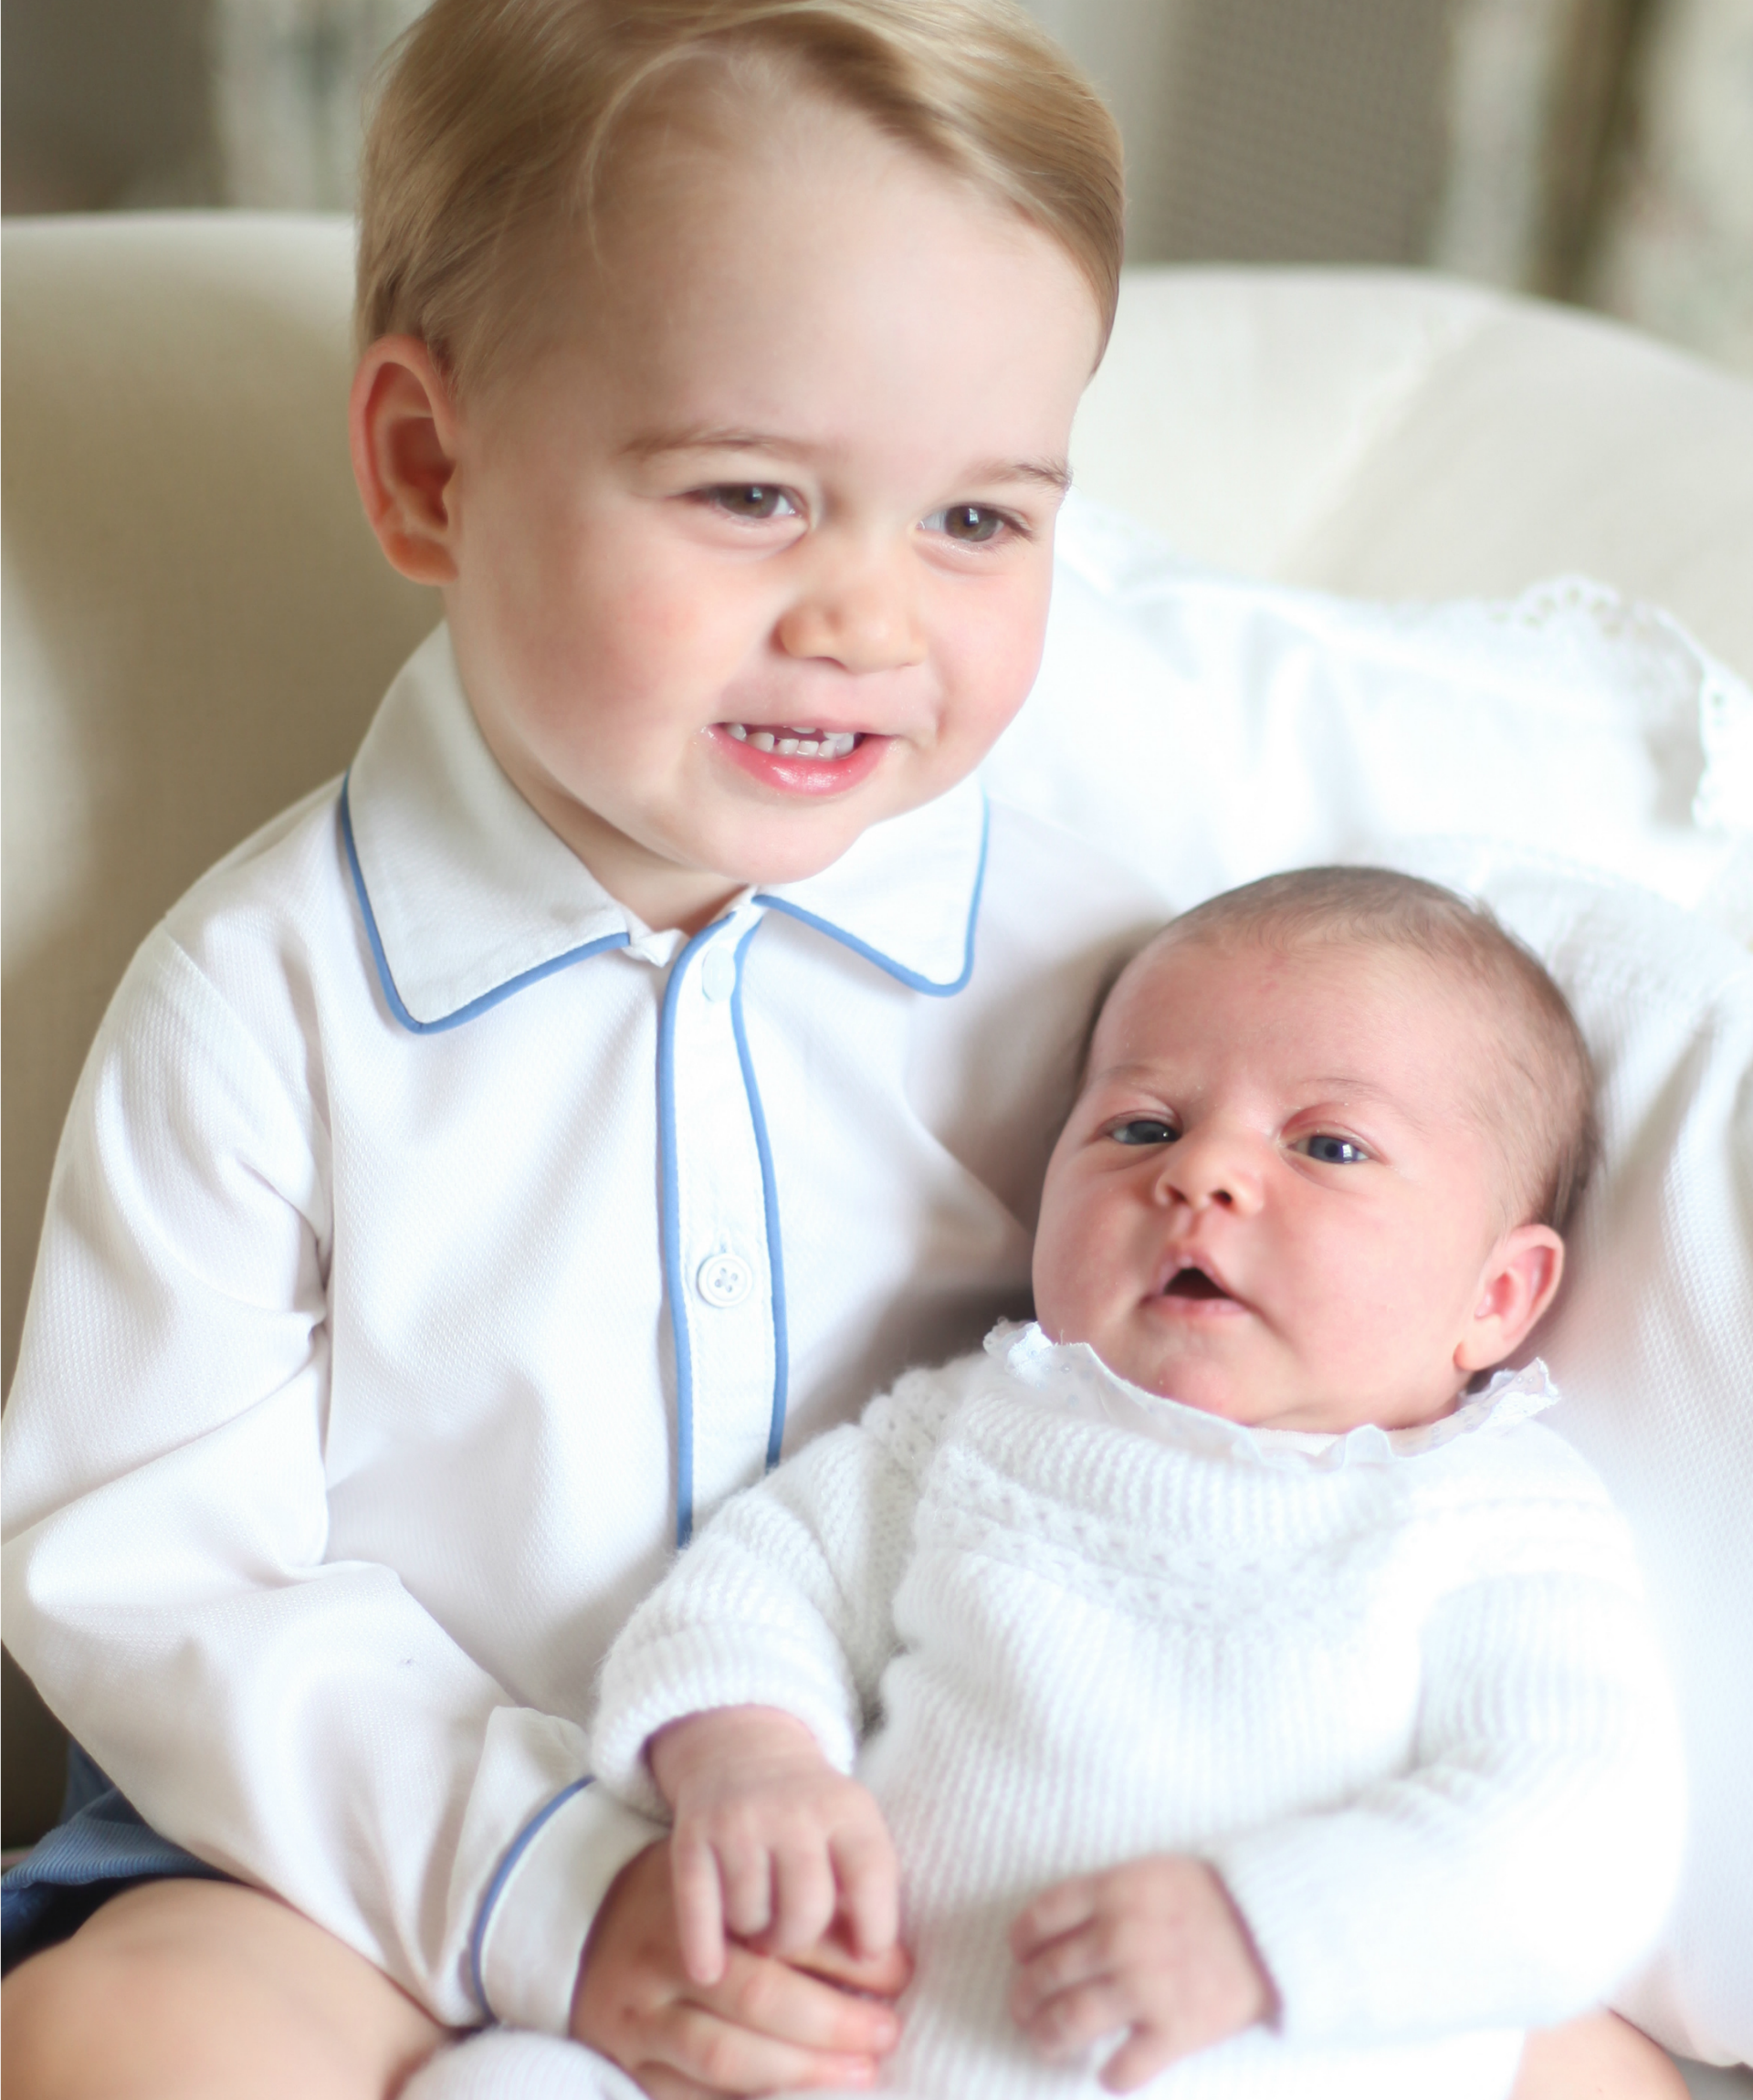 The truth about Princess Charlotte’s clothes